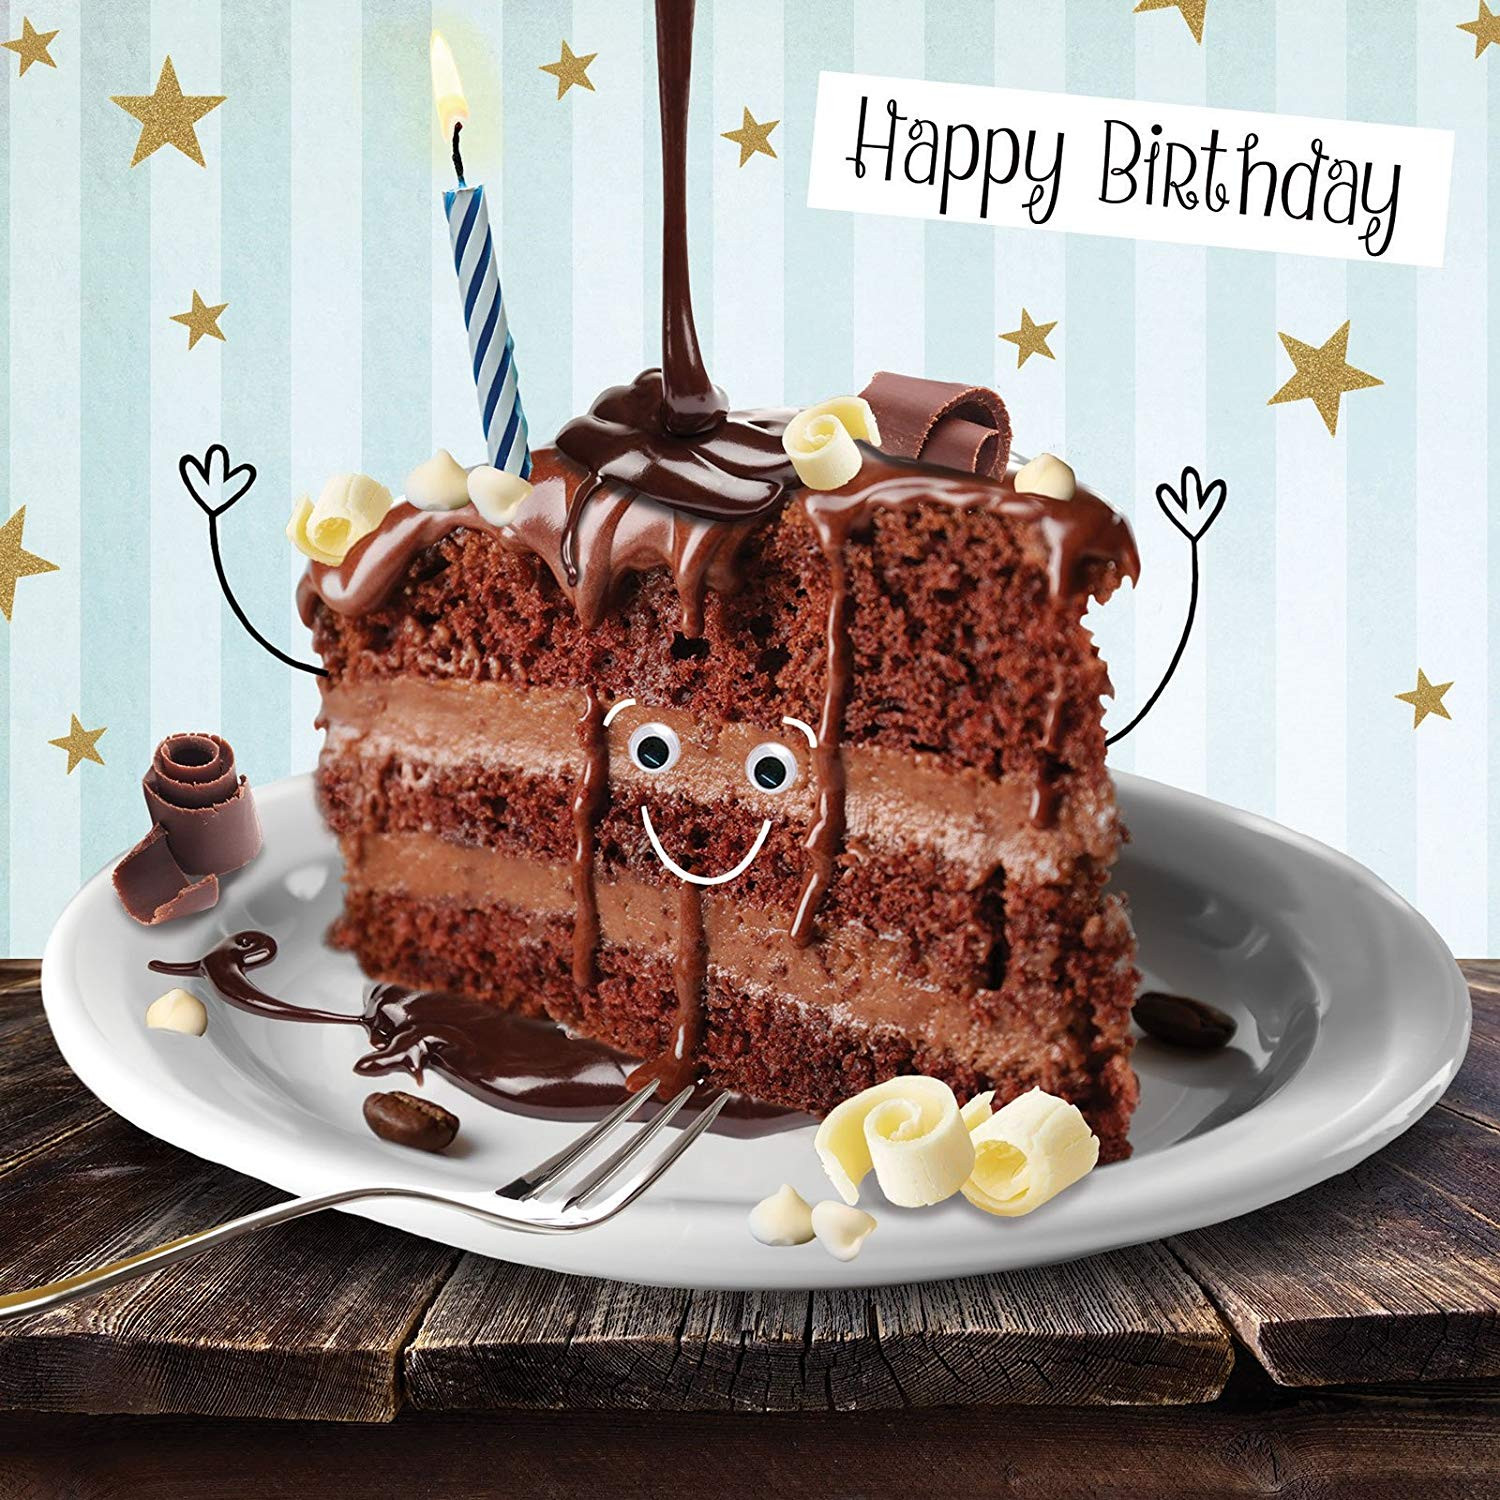 Funny Happy Birthday Cakes
 Funny Chocolate Cake Birthday Card 3D Goggly Moving Eyes